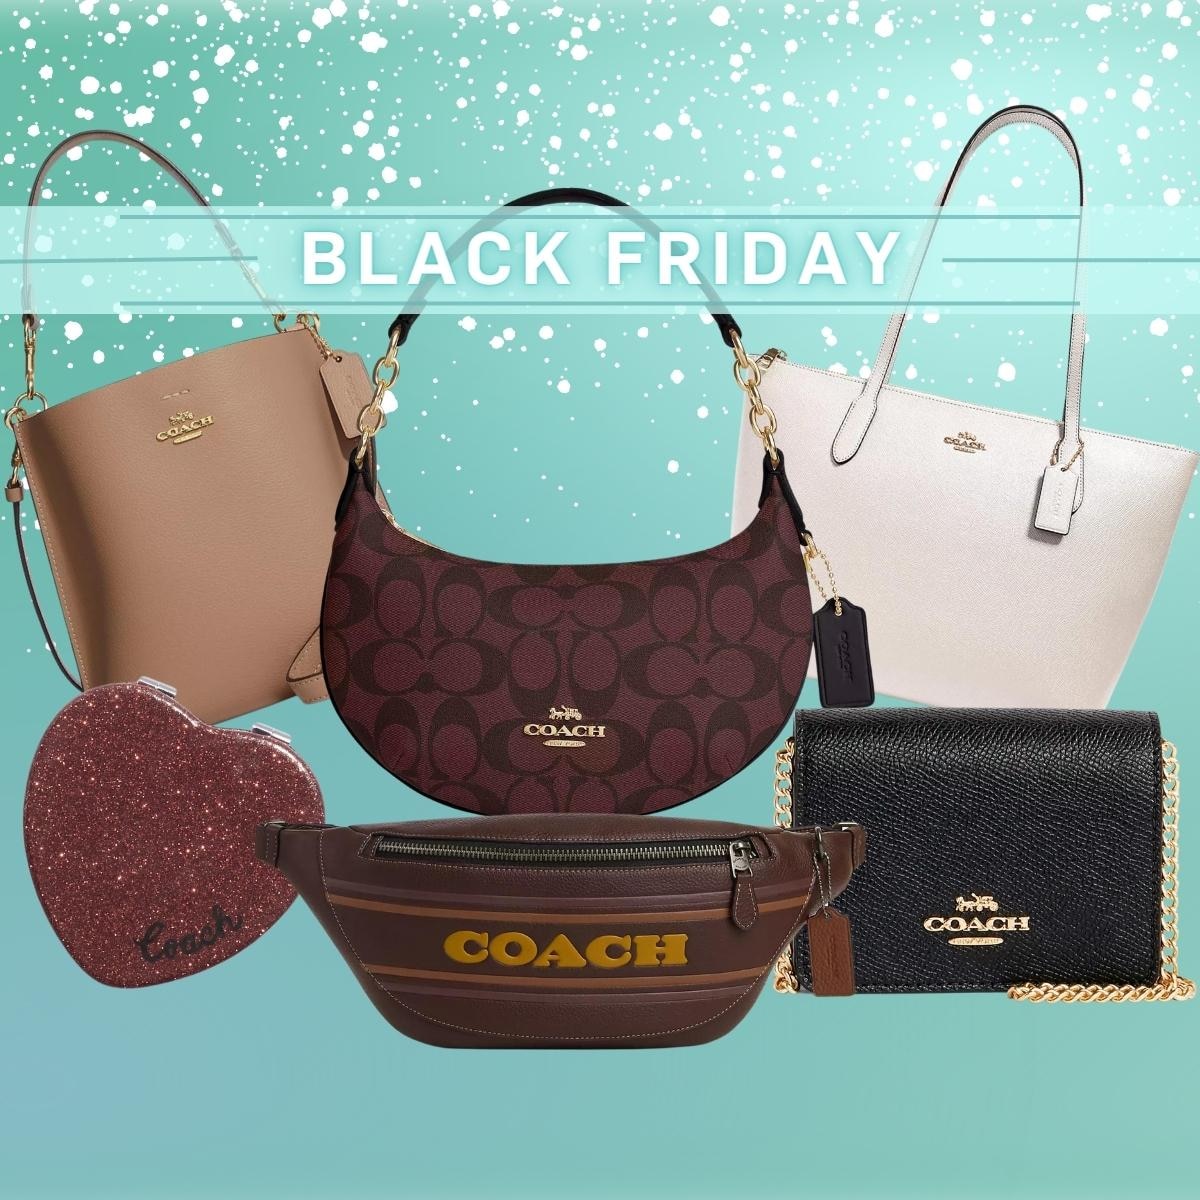 Coach Outlet fall arrivals: Bags, apparel, accessories, shoes, jewelry -  cleveland.com